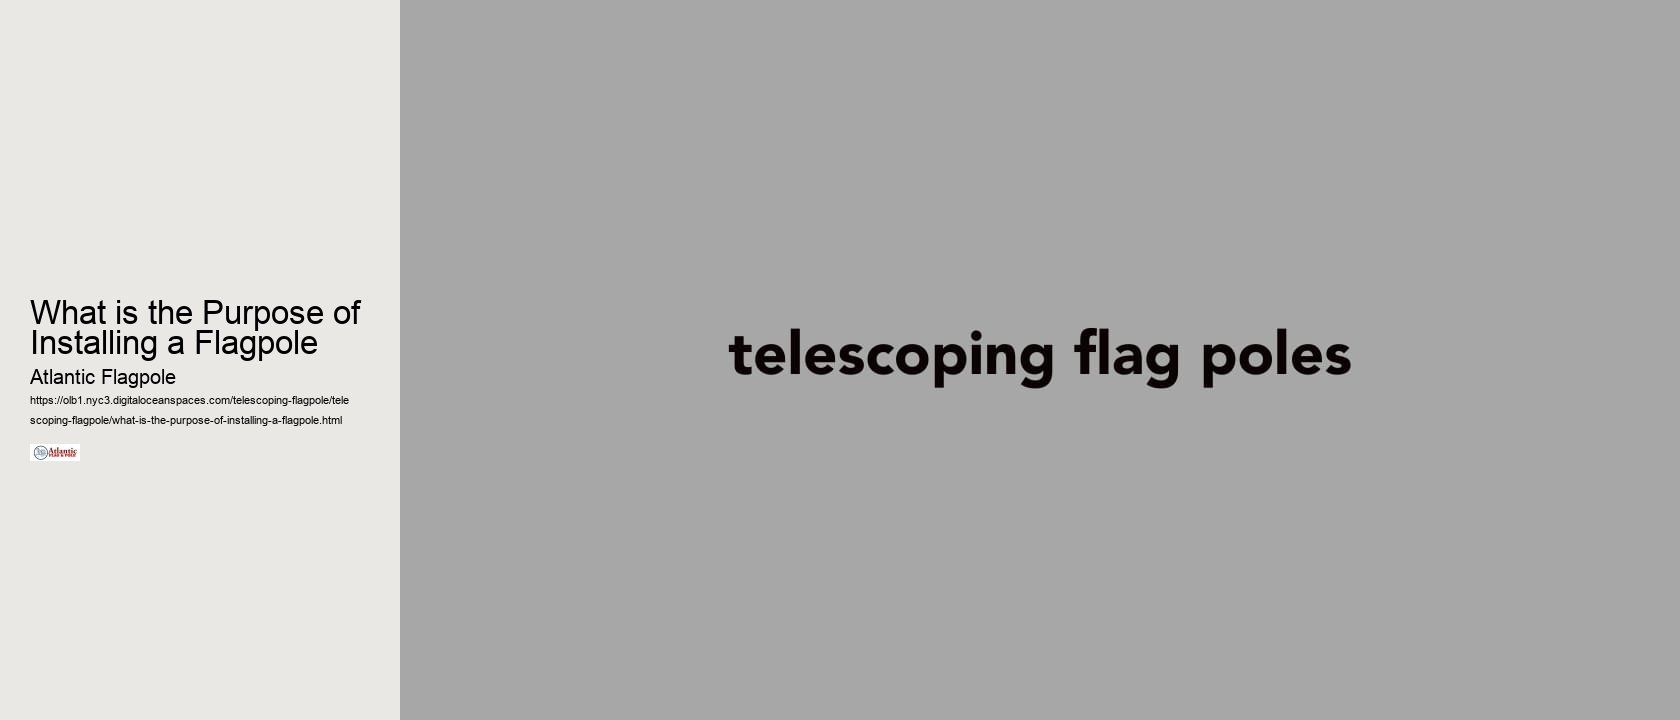 What is the Purpose of Installing a Flagpole